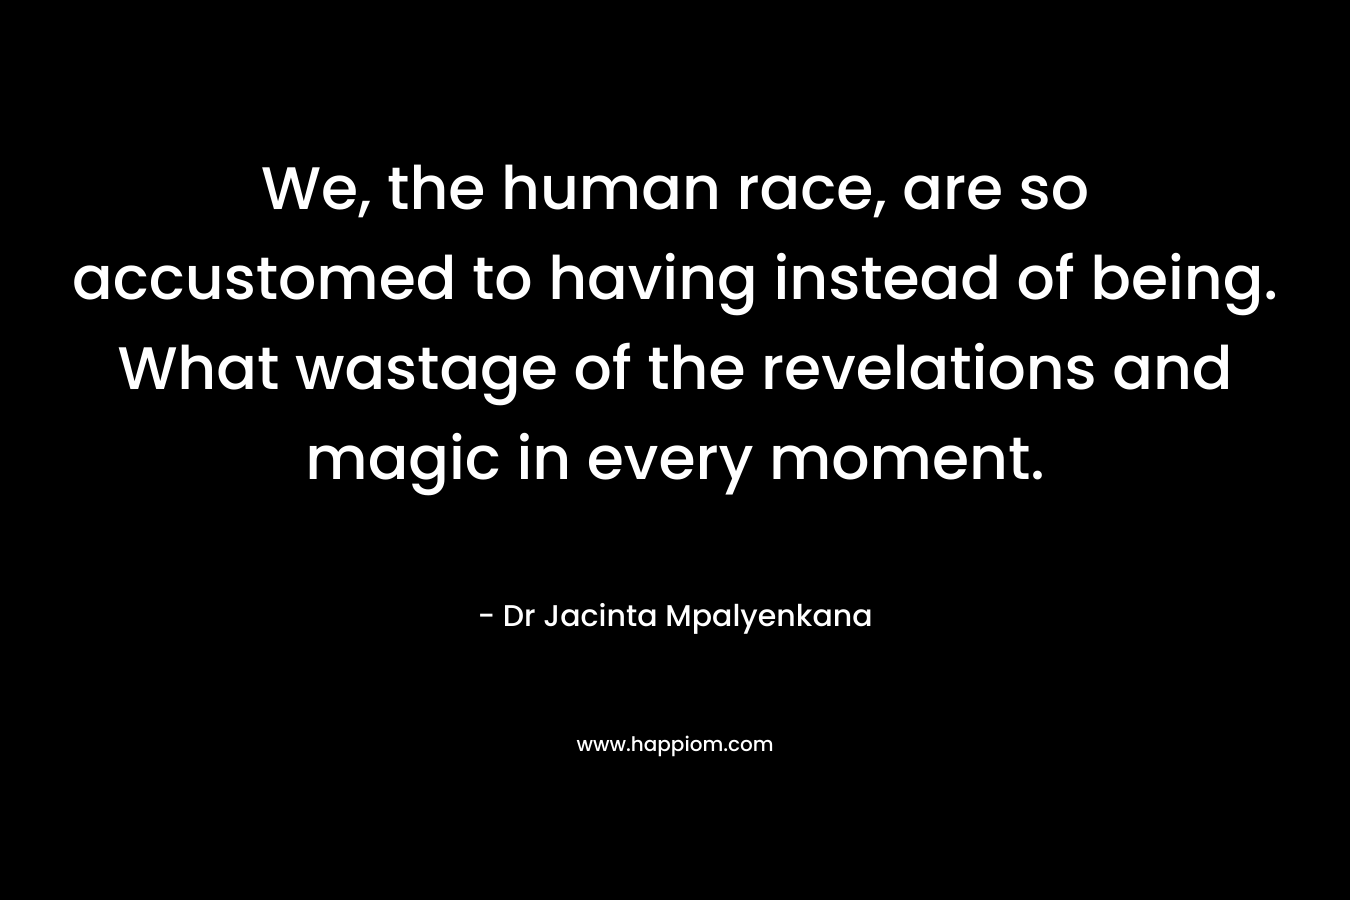 We, the human race, are so accustomed to having instead of being. What wastage of the revelations and magic in every moment. – Dr Jacinta Mpalyenkana